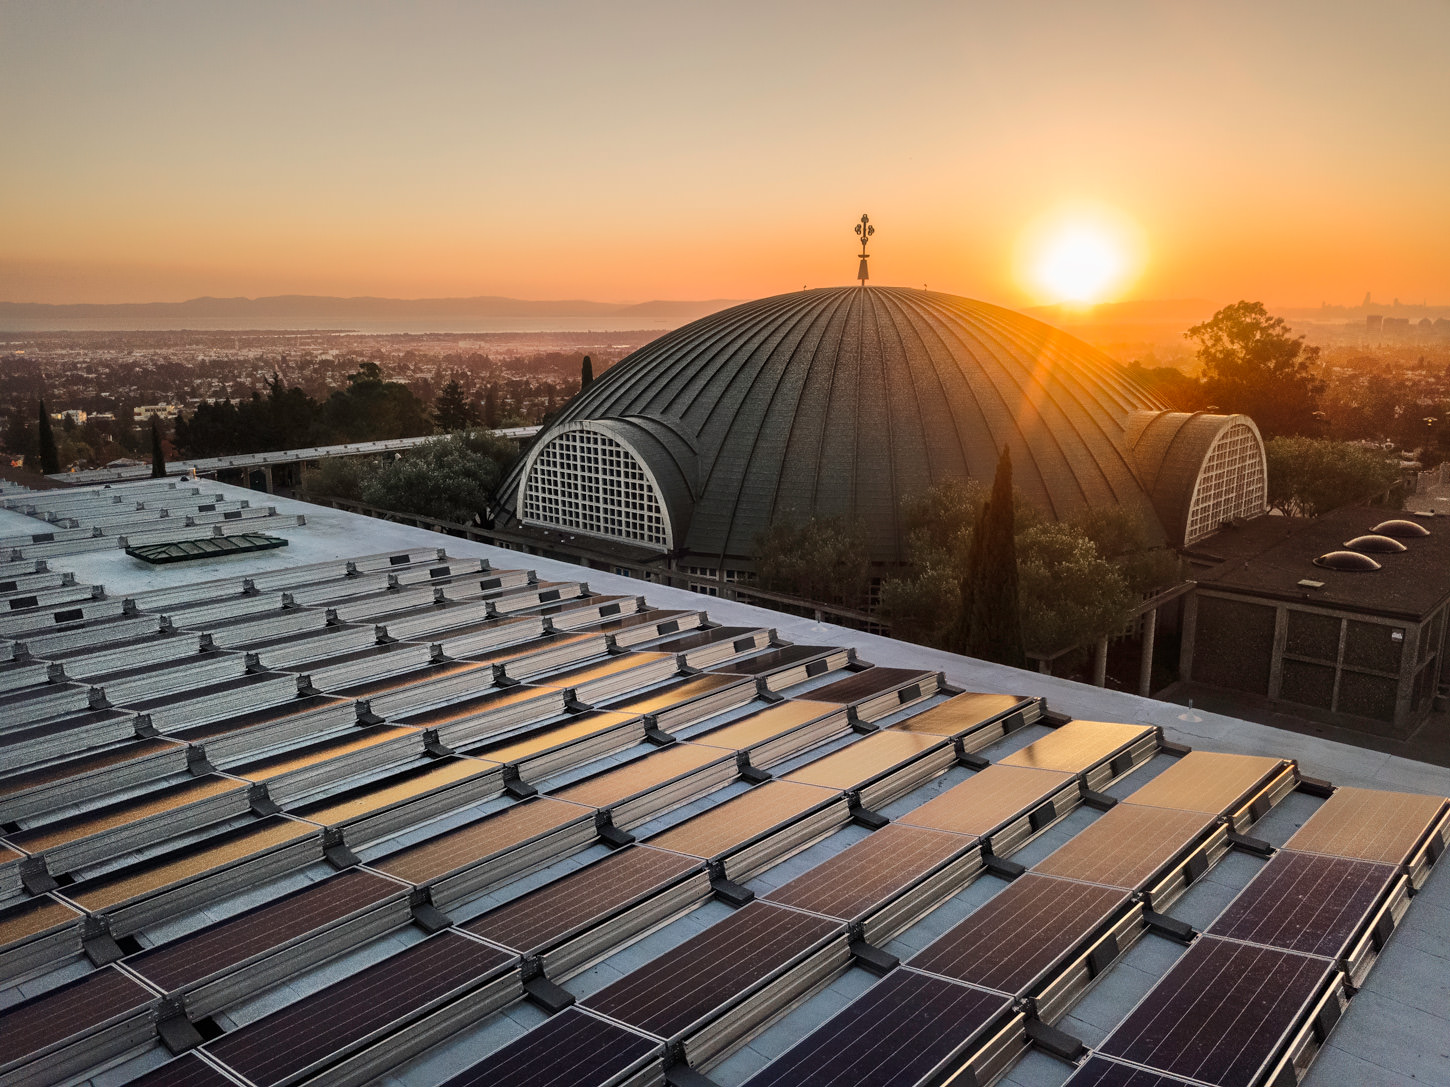  House of Worship California | 156 KW Developed by Solar Technologies  